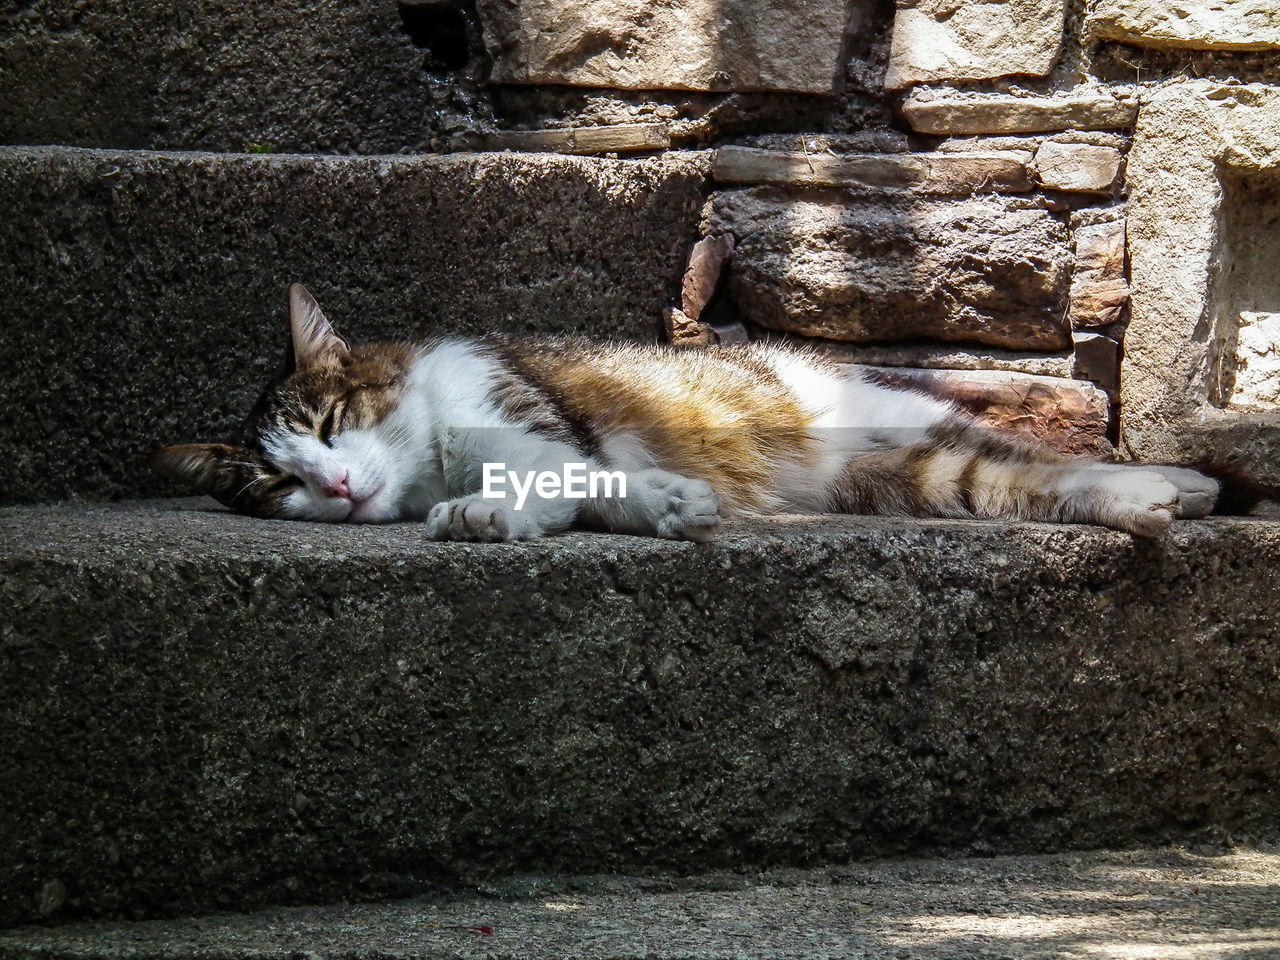 CLOSE-UP OF CAT SLEEPING BY RETAINING WALL